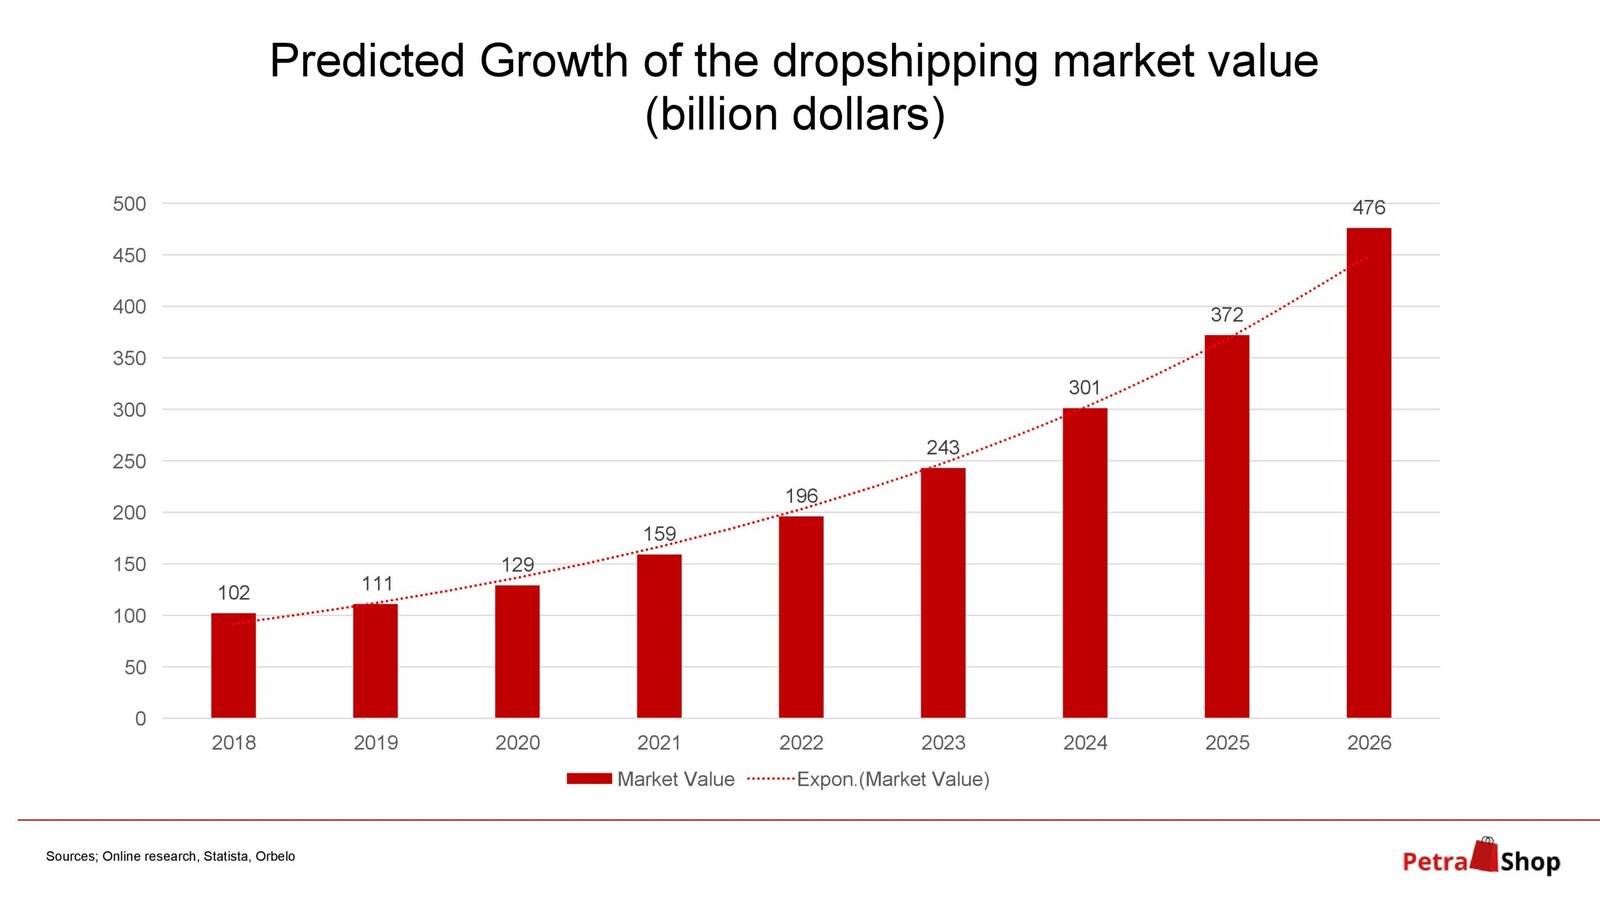 Predicted Growth of the Dropshipping market